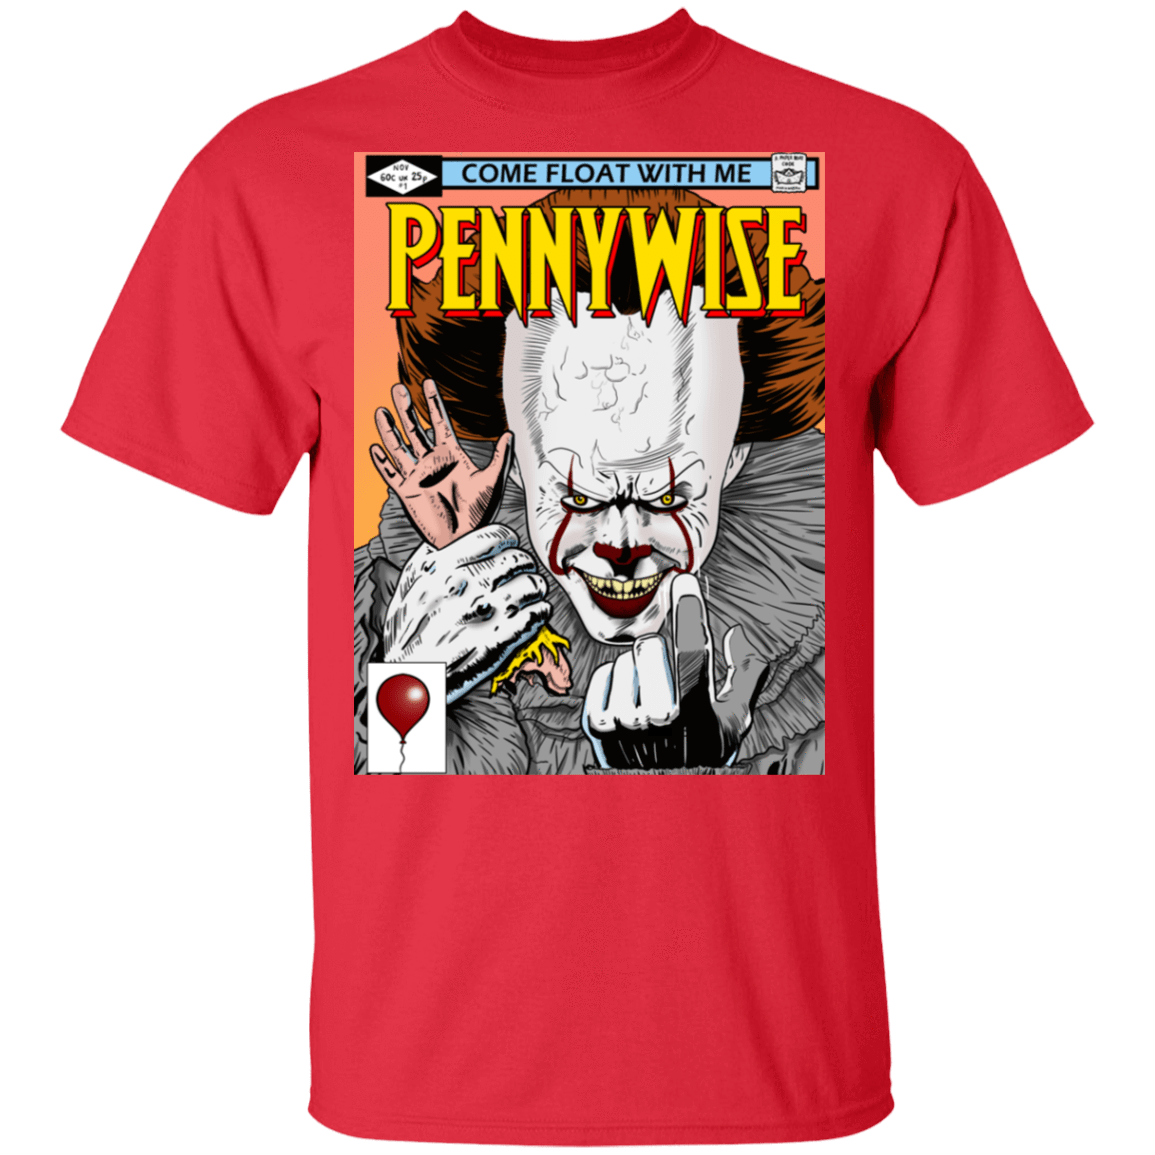 T-Shirts Red / S Pennywise 8+ T-Shirt